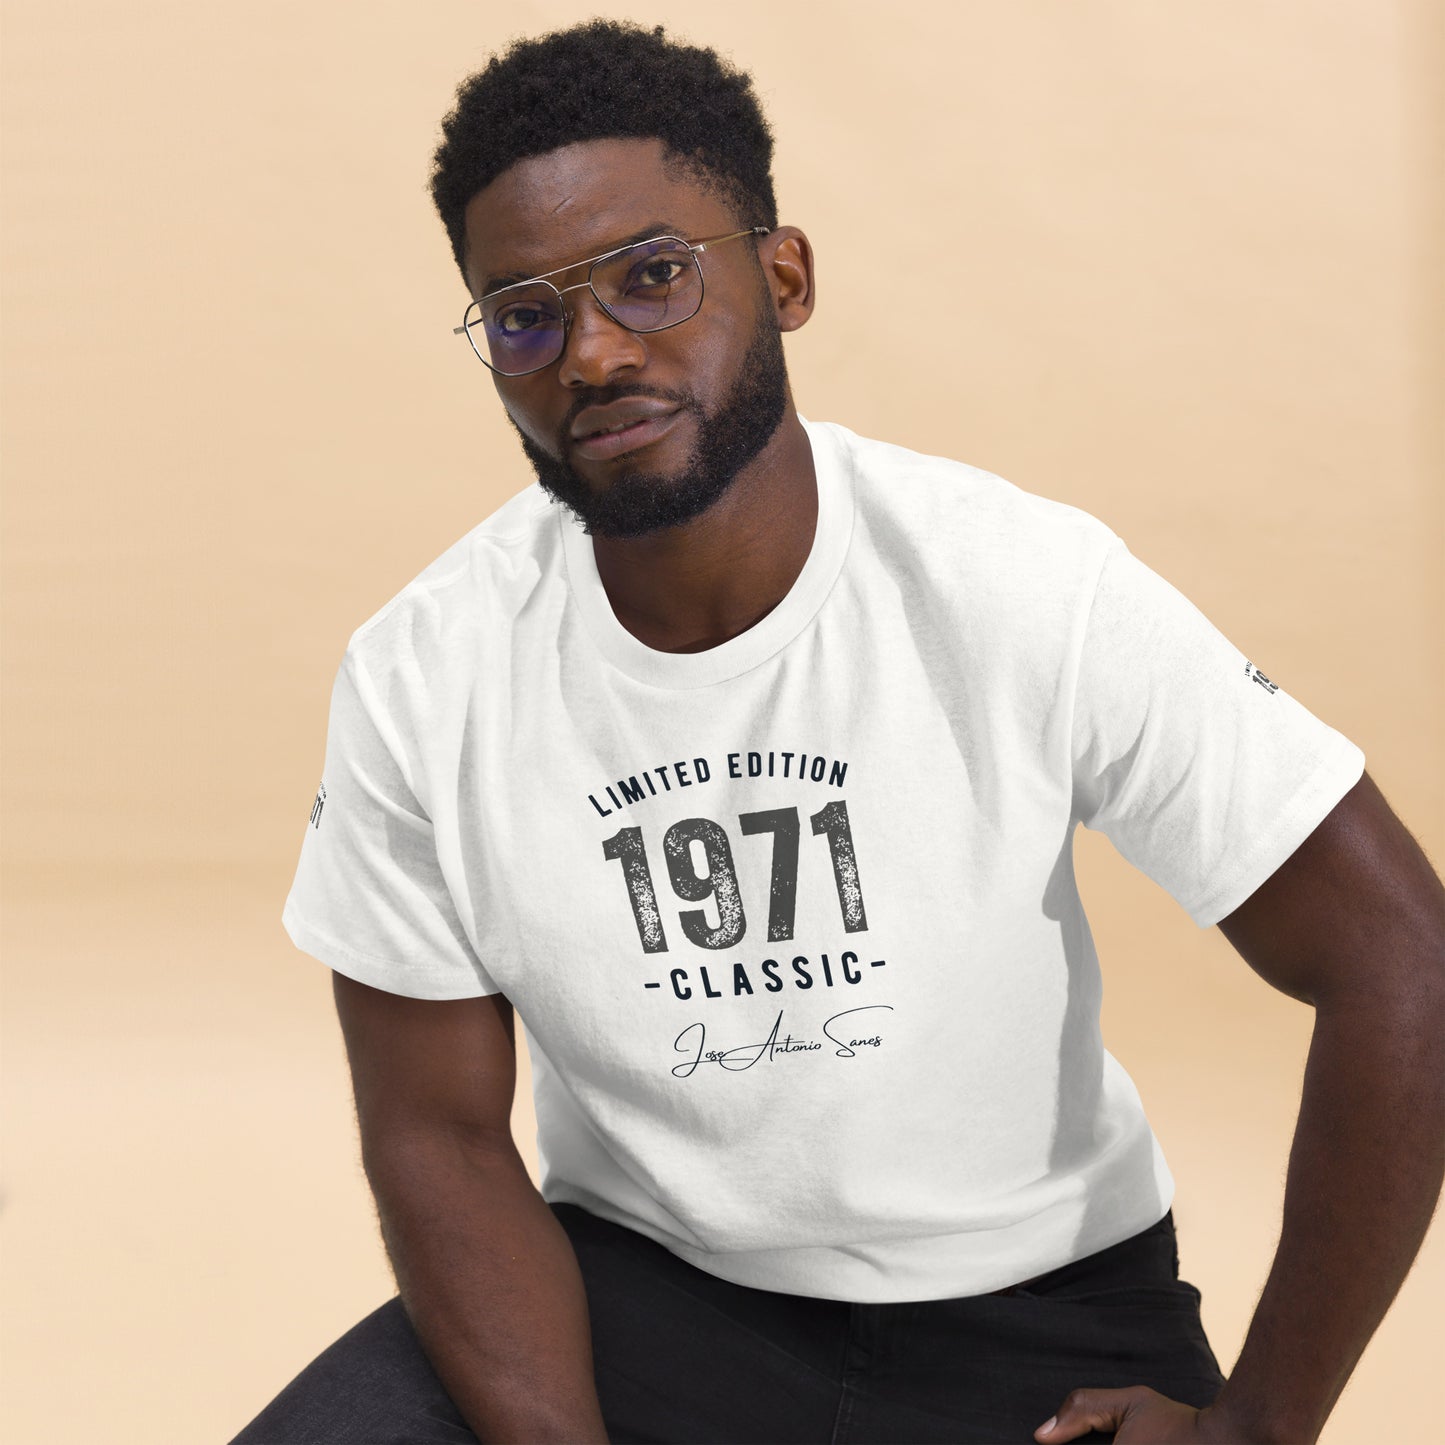 Limited Edition 1971 Classic T-Shirt